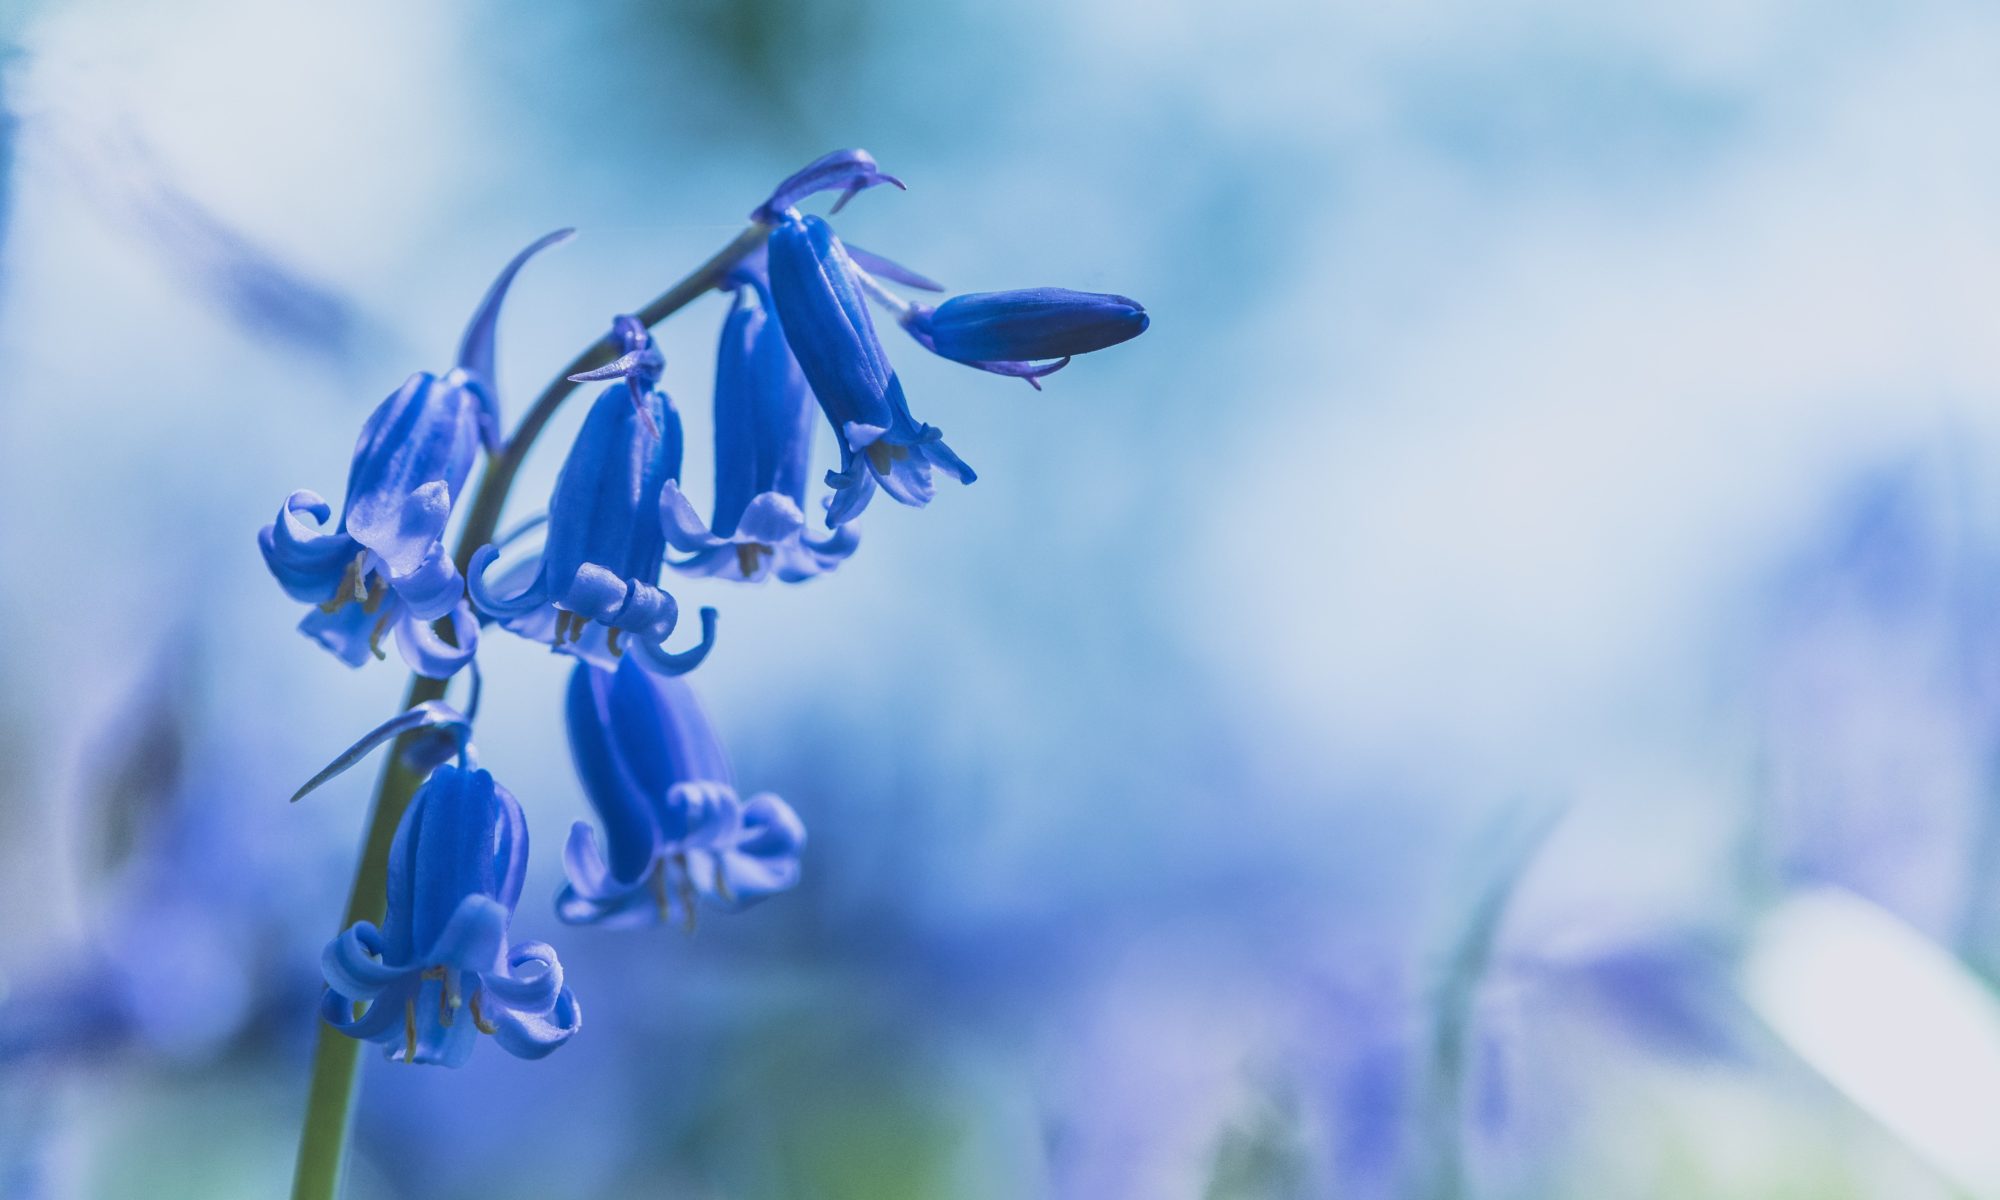 bluebell photo to illustrate blog on mindfulness and me